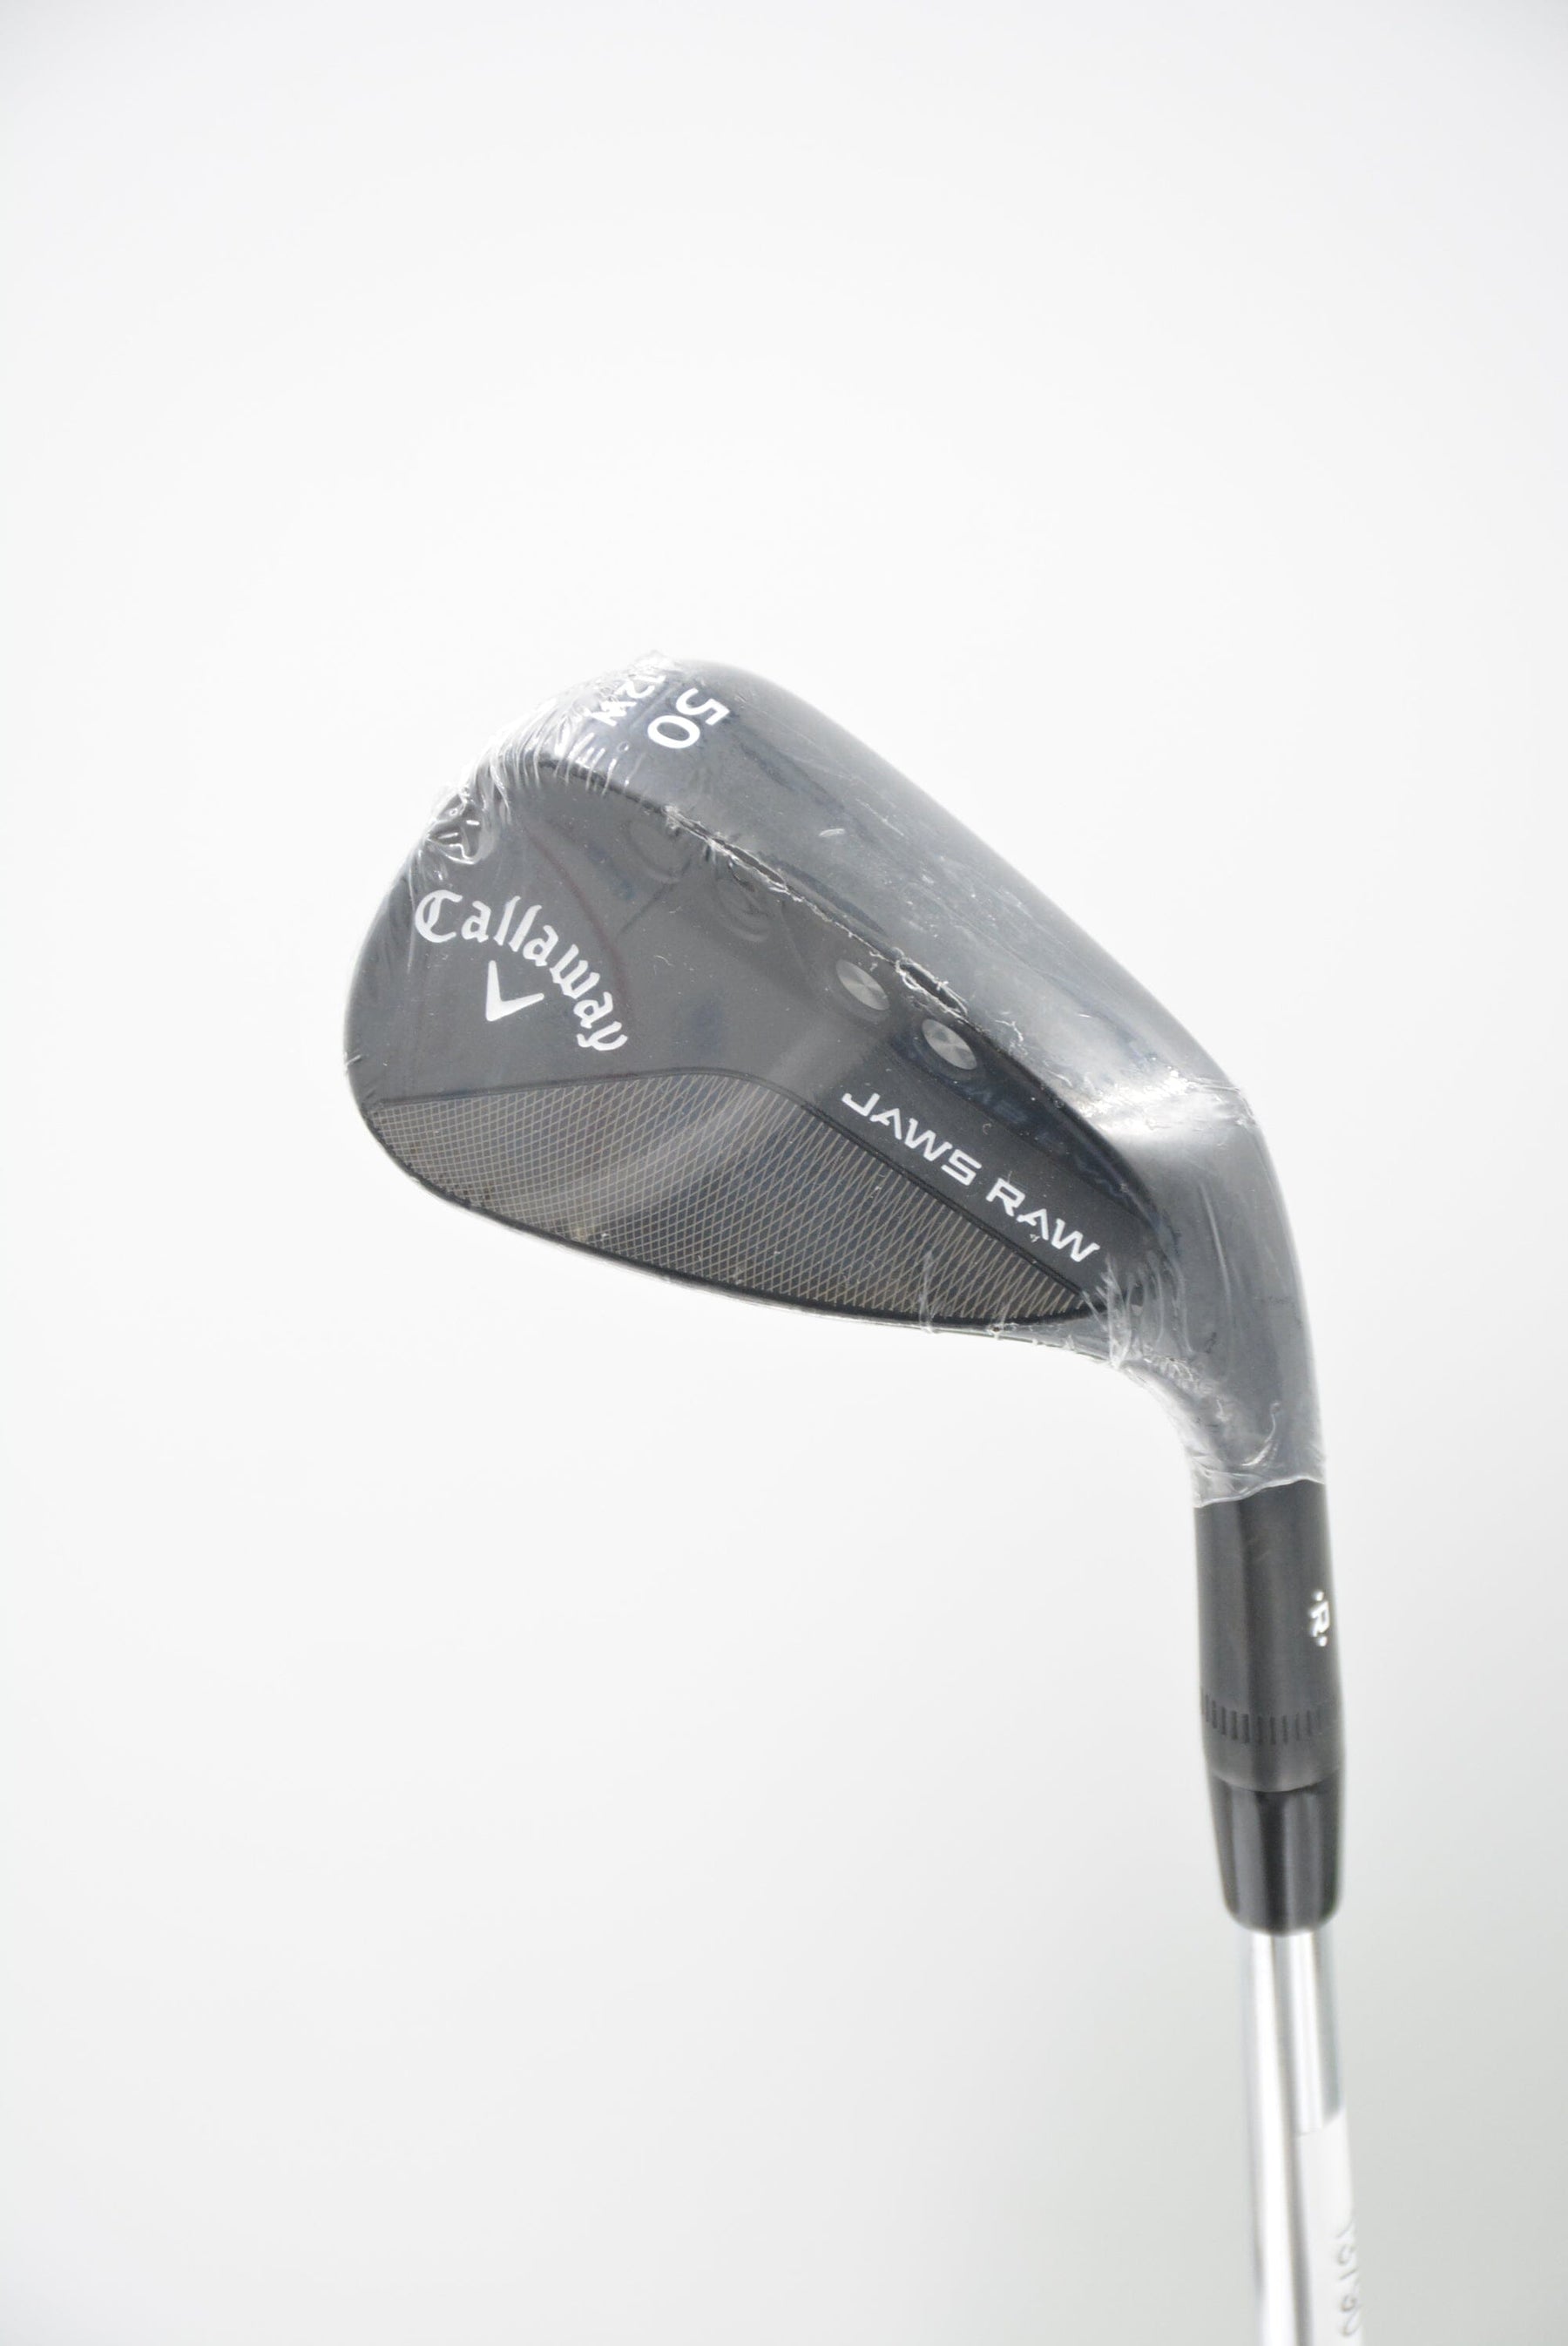 S Grind vs W Grind: Perfecting Your Wedge Game